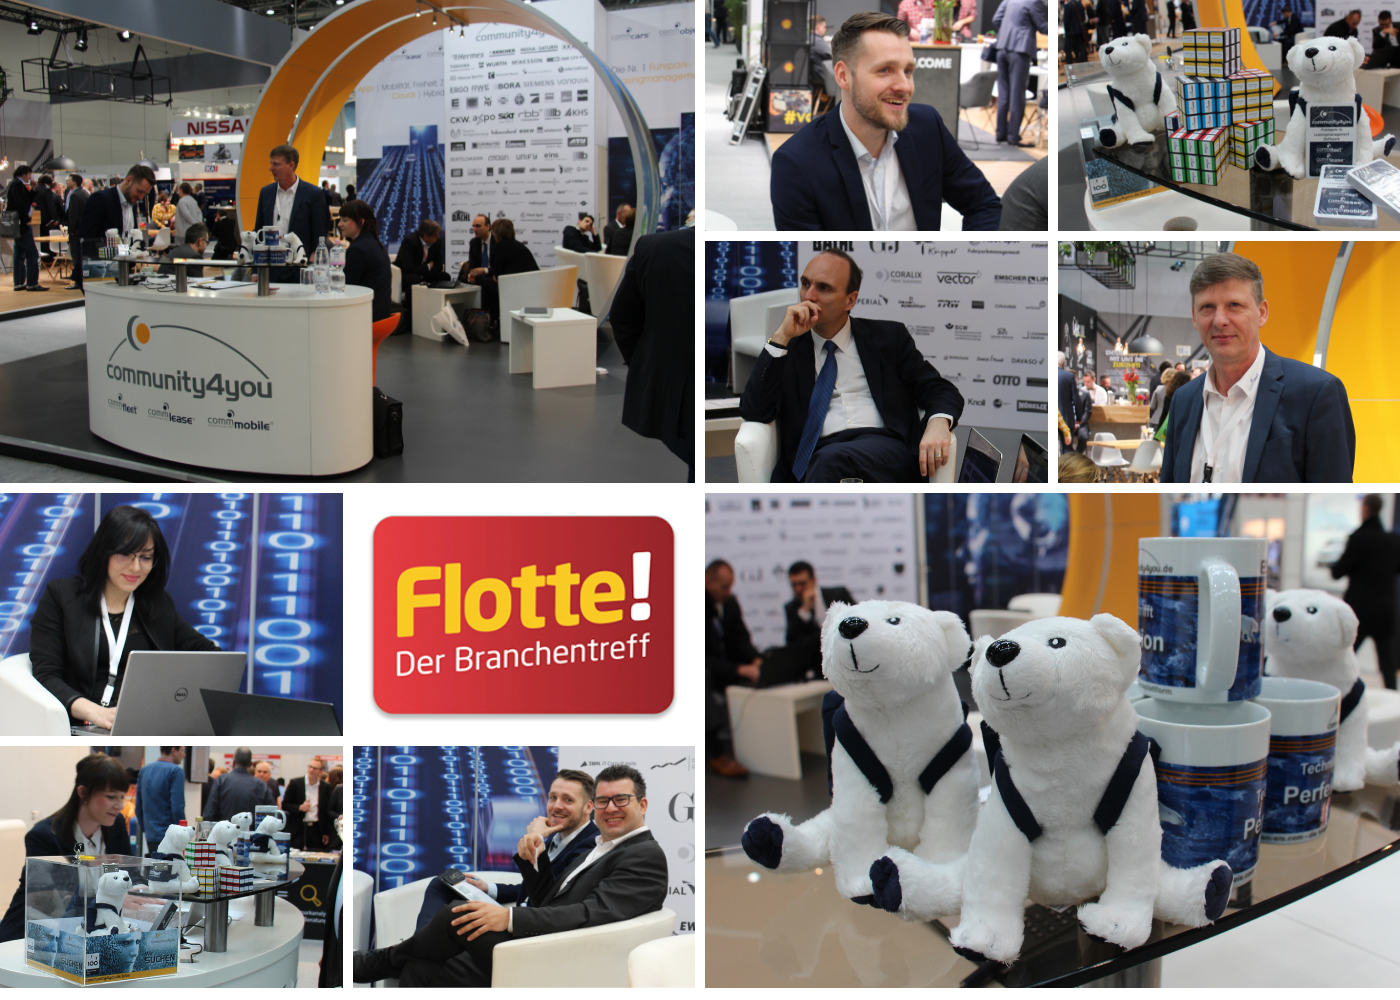 FLOTTE! Der Branchentreff 2019 | community4you AG takes a look at the fleet management's future